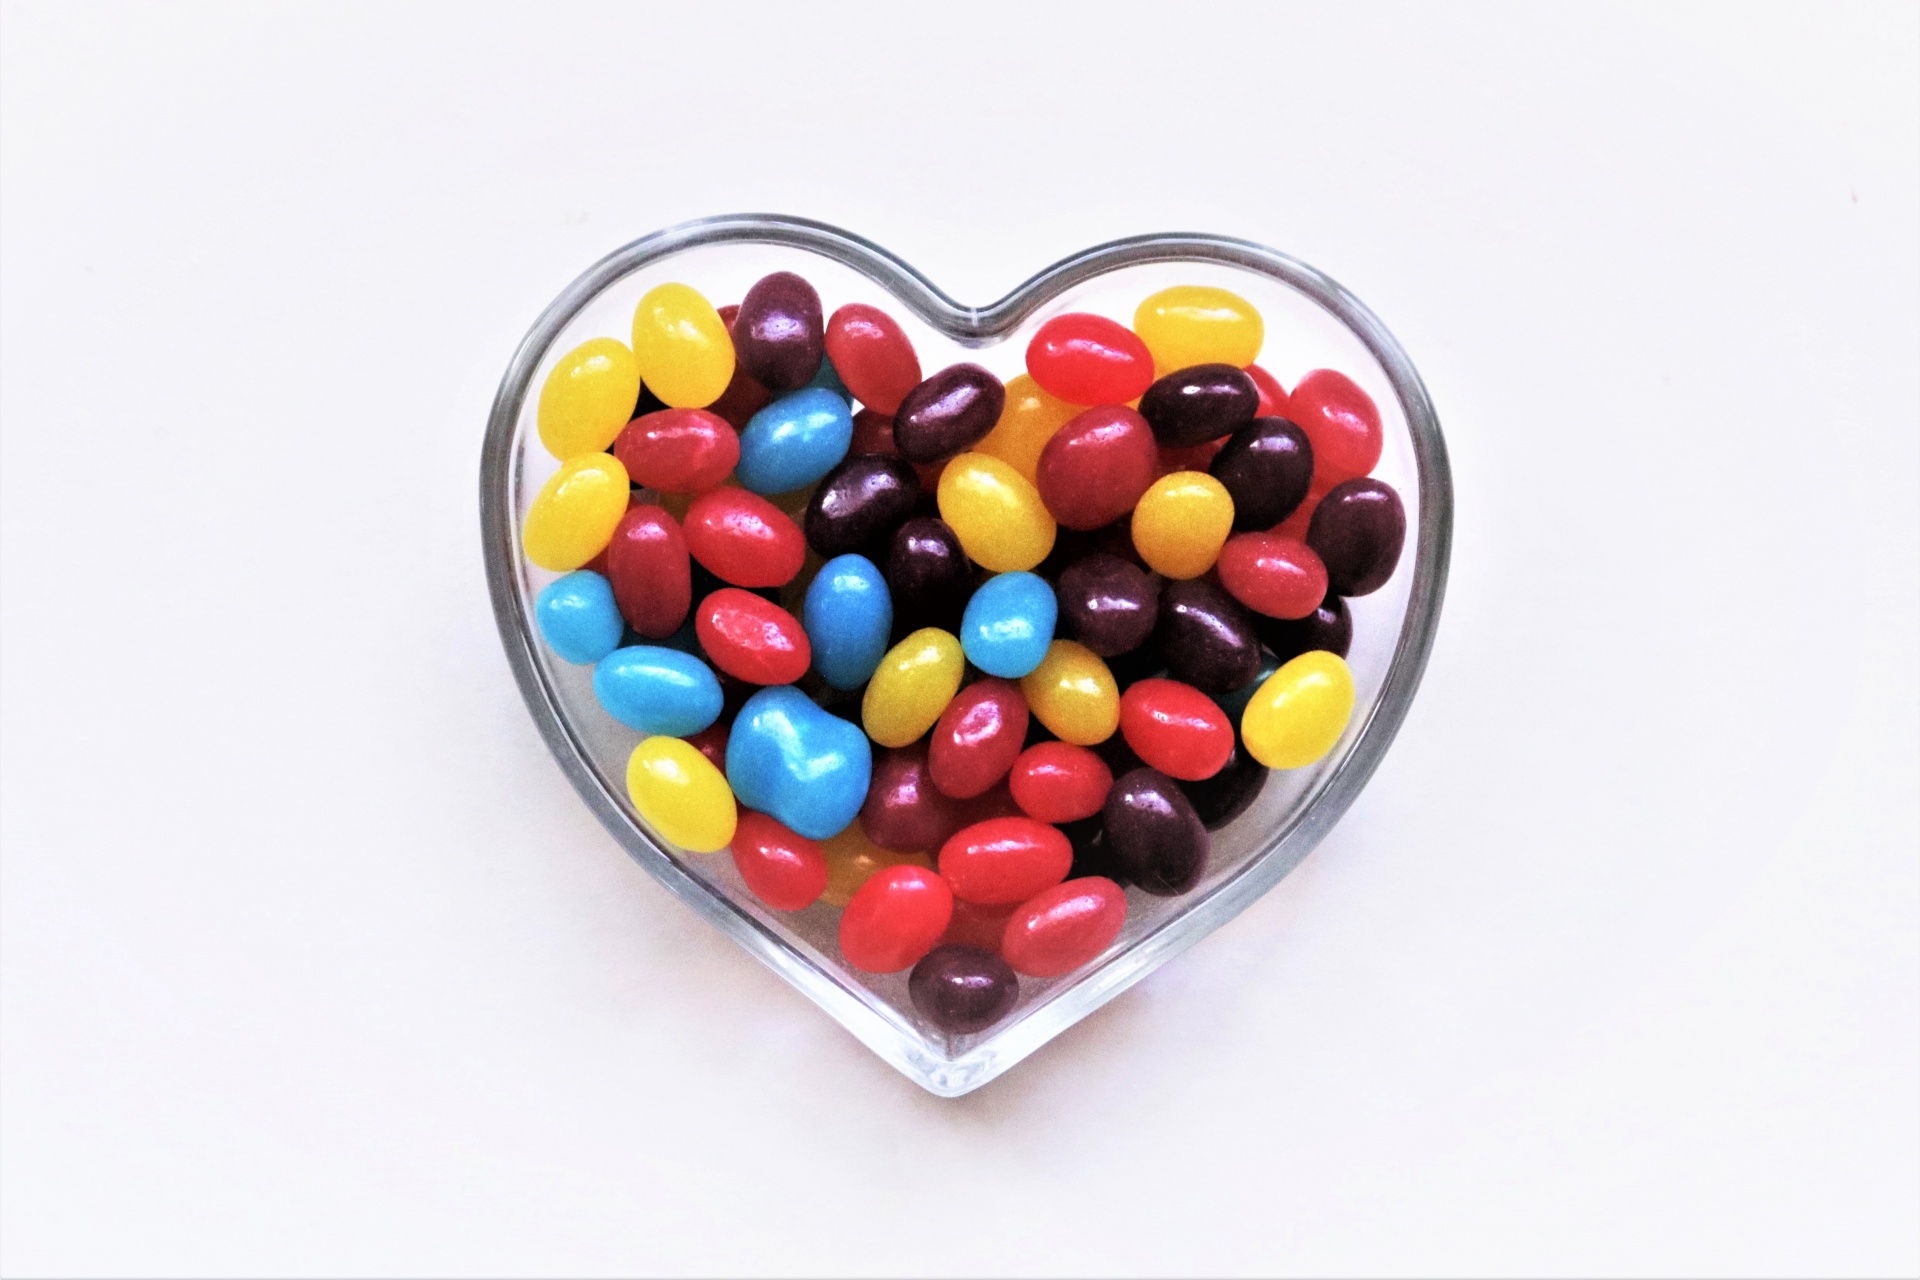 A clear glass heart shaped dish full of colorful jelly beans.